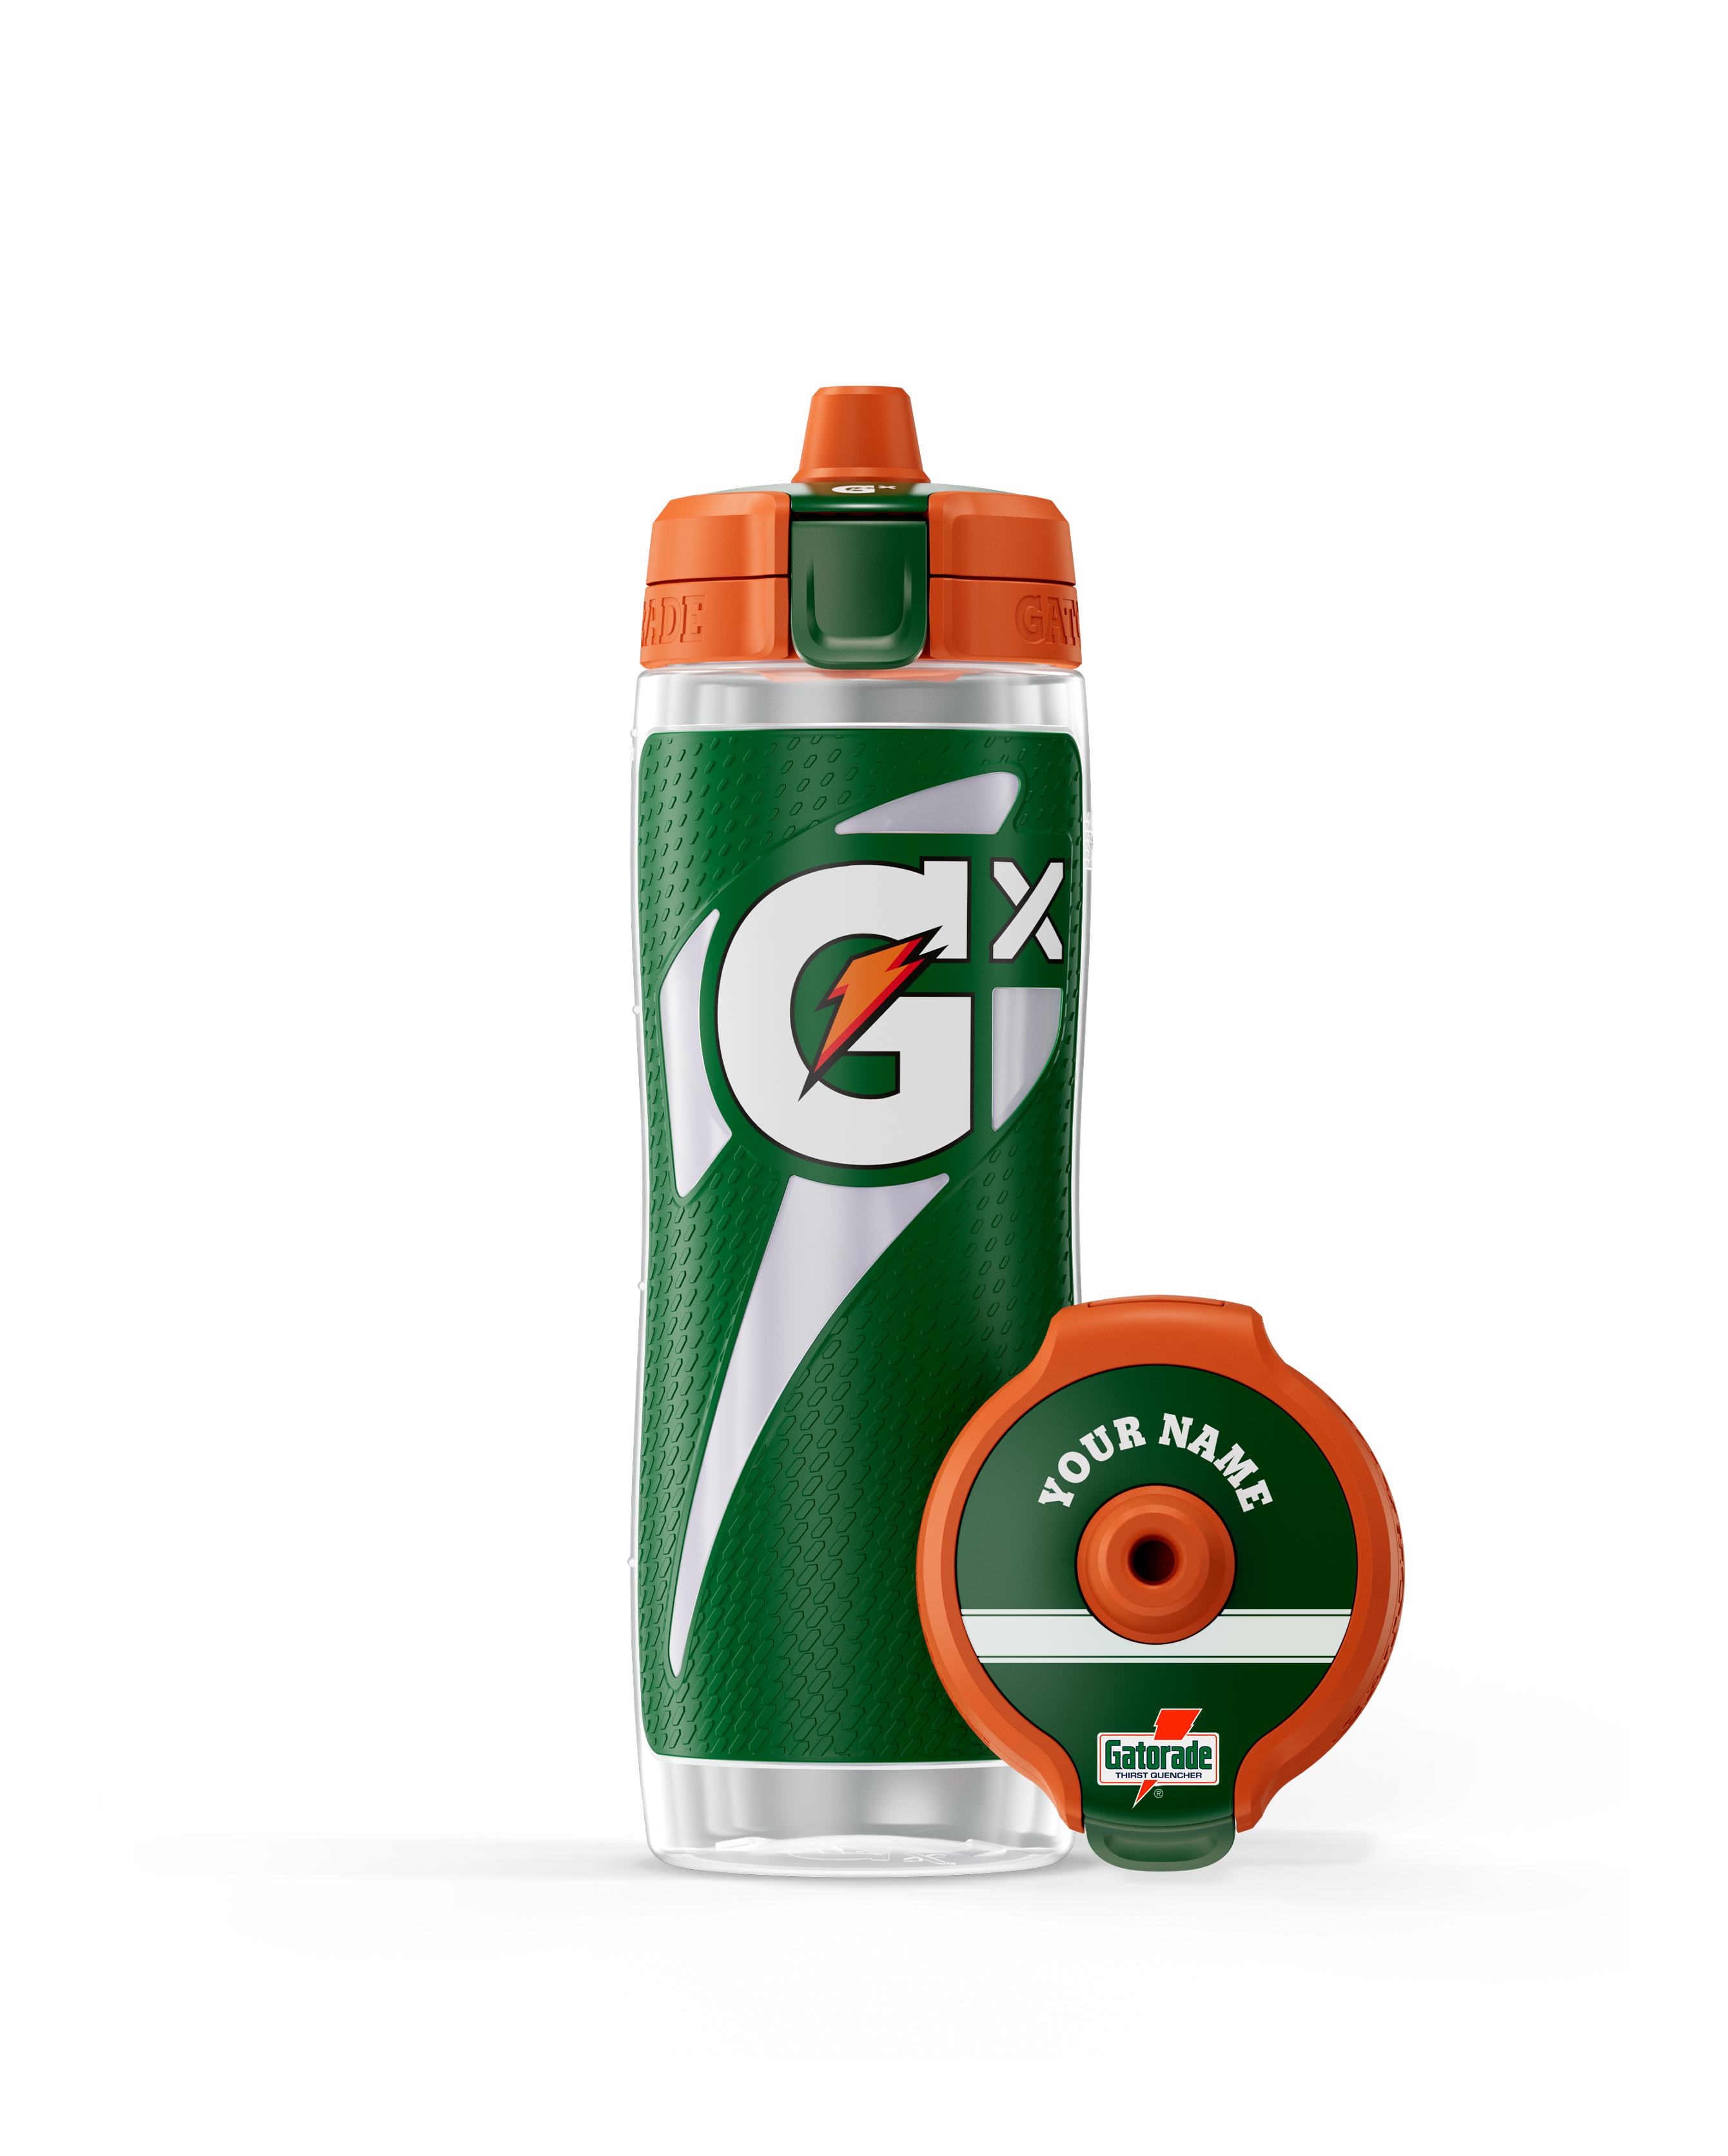 Gx Exclusive Bottle Green with customizable lid